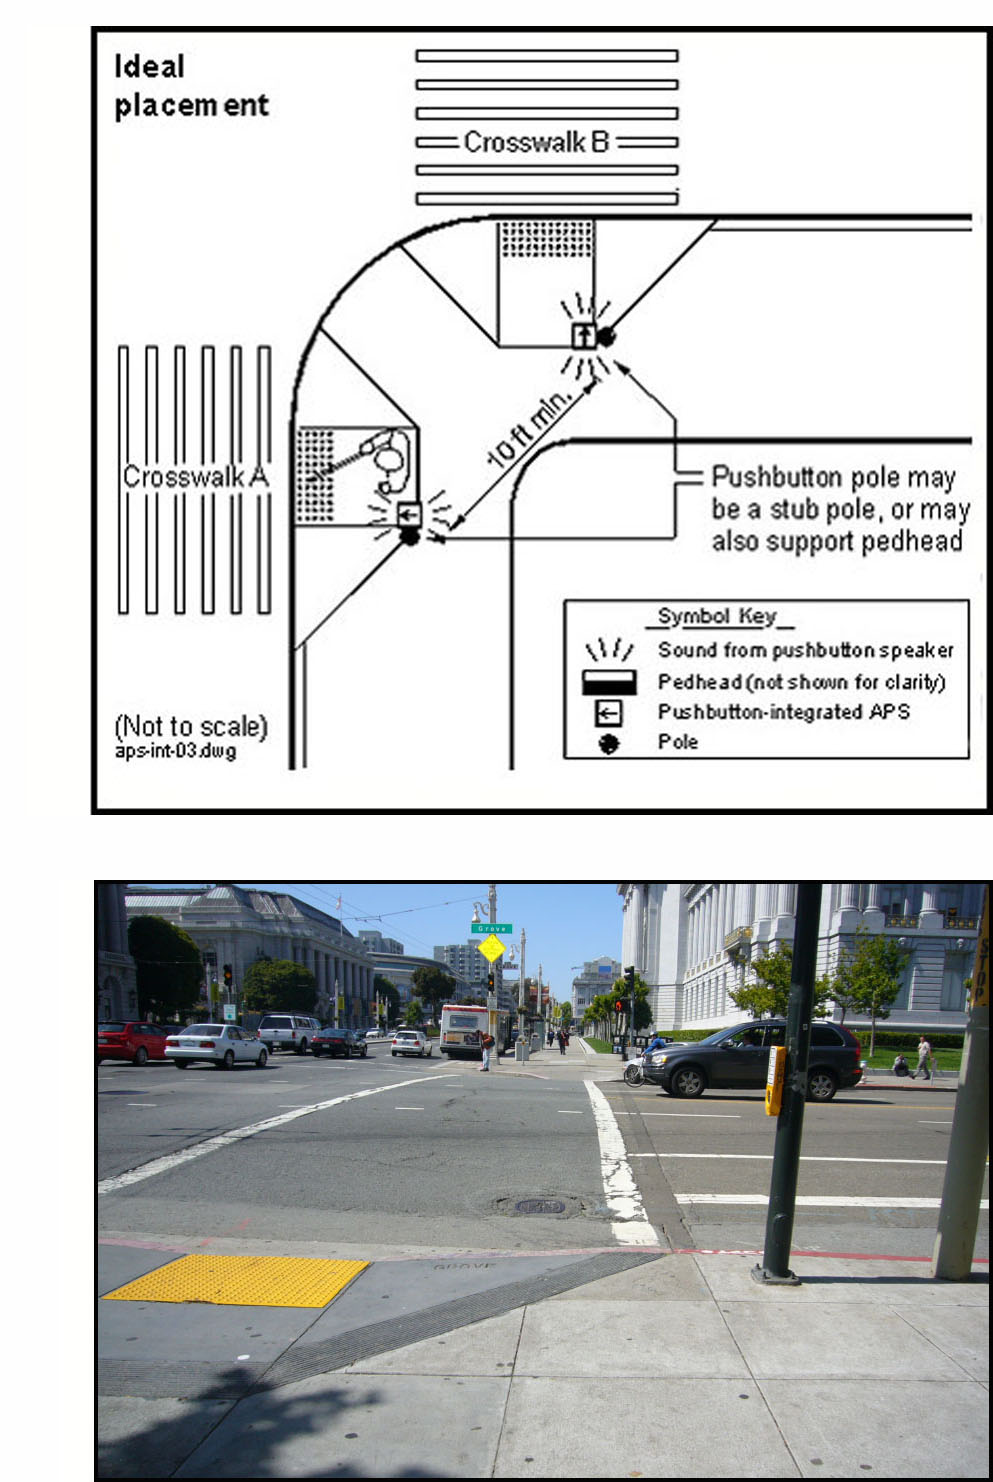 This shows a drawing and a photograph.  The drawing shows a corner with correct APS installation.  There is a ramp going down toward the crosswalk in both directions, and at the top of each ramp (on the side furthest from the parallel street) there is a pole with the pushbutton-integrated APS with sound coming out of the pushbutton.  It says the poles are a minimum of 10 feet apart, and that the pole can be a stub pole or may also support the pedhead.  The photo shows a corner at a street 6 or 7 lanes wide, with the other street being on our left.  A ramp goes down to the crosswalk, with a bright yellow square of detectable warning along the bottom of the ramp.   To the right of the ramp is a tall pole, with an APS installed on the left side of the pole (the side closest to the crosswalk), with the front of the box parallel to the crosswalk